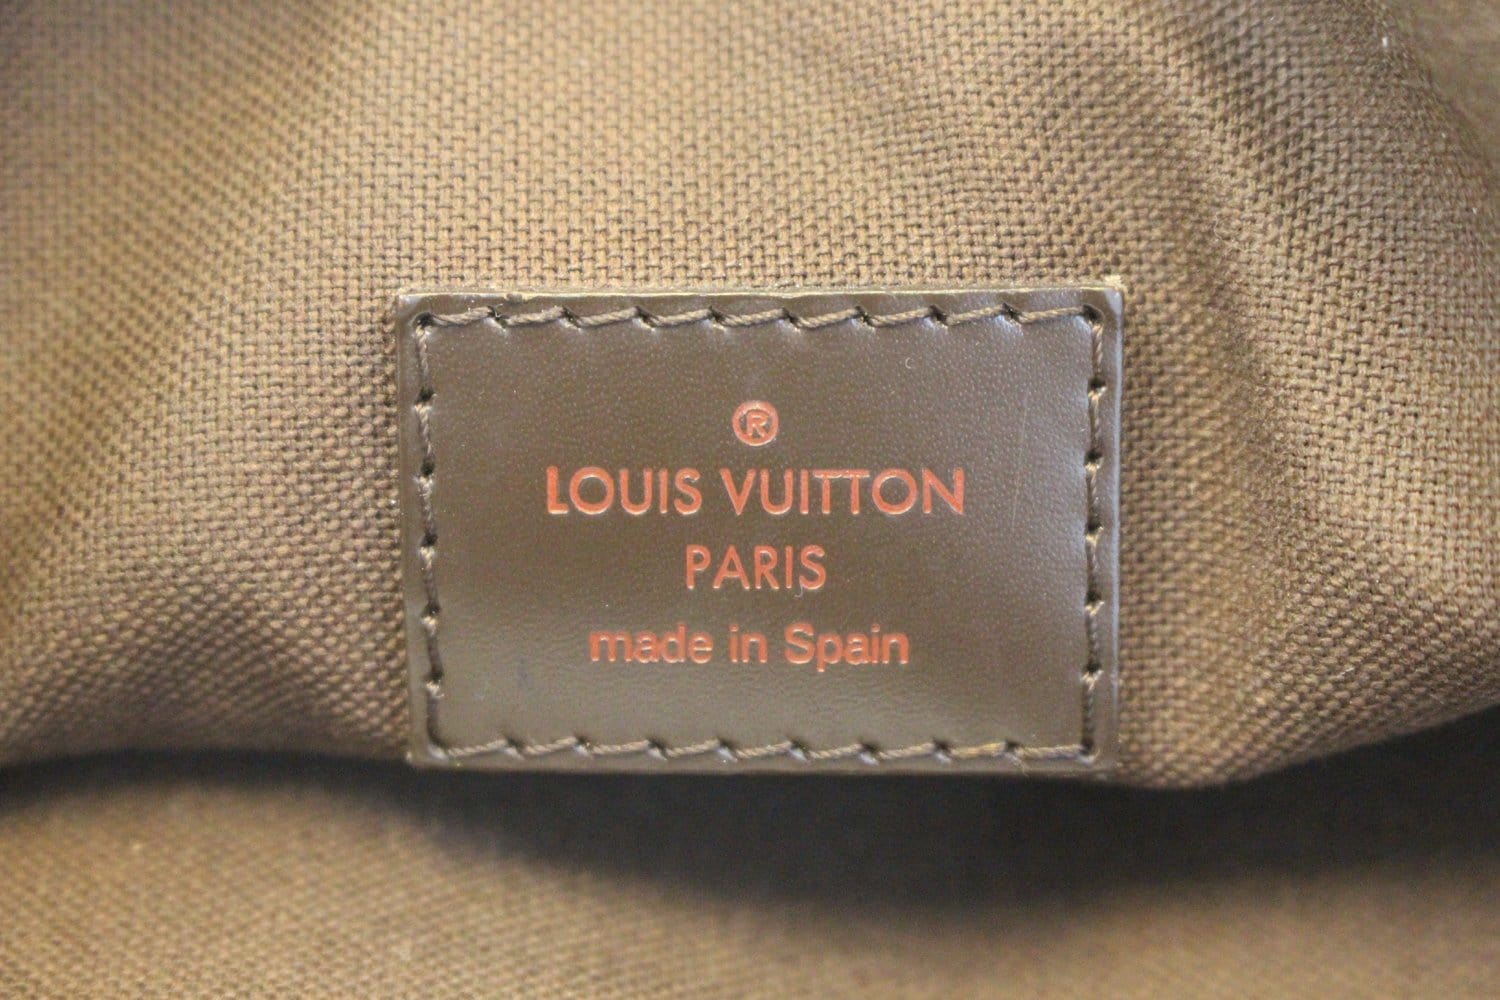 Auth Louis Vuitton Damier Ebene Cabas Beaubourg Tote Bag N52006 Used